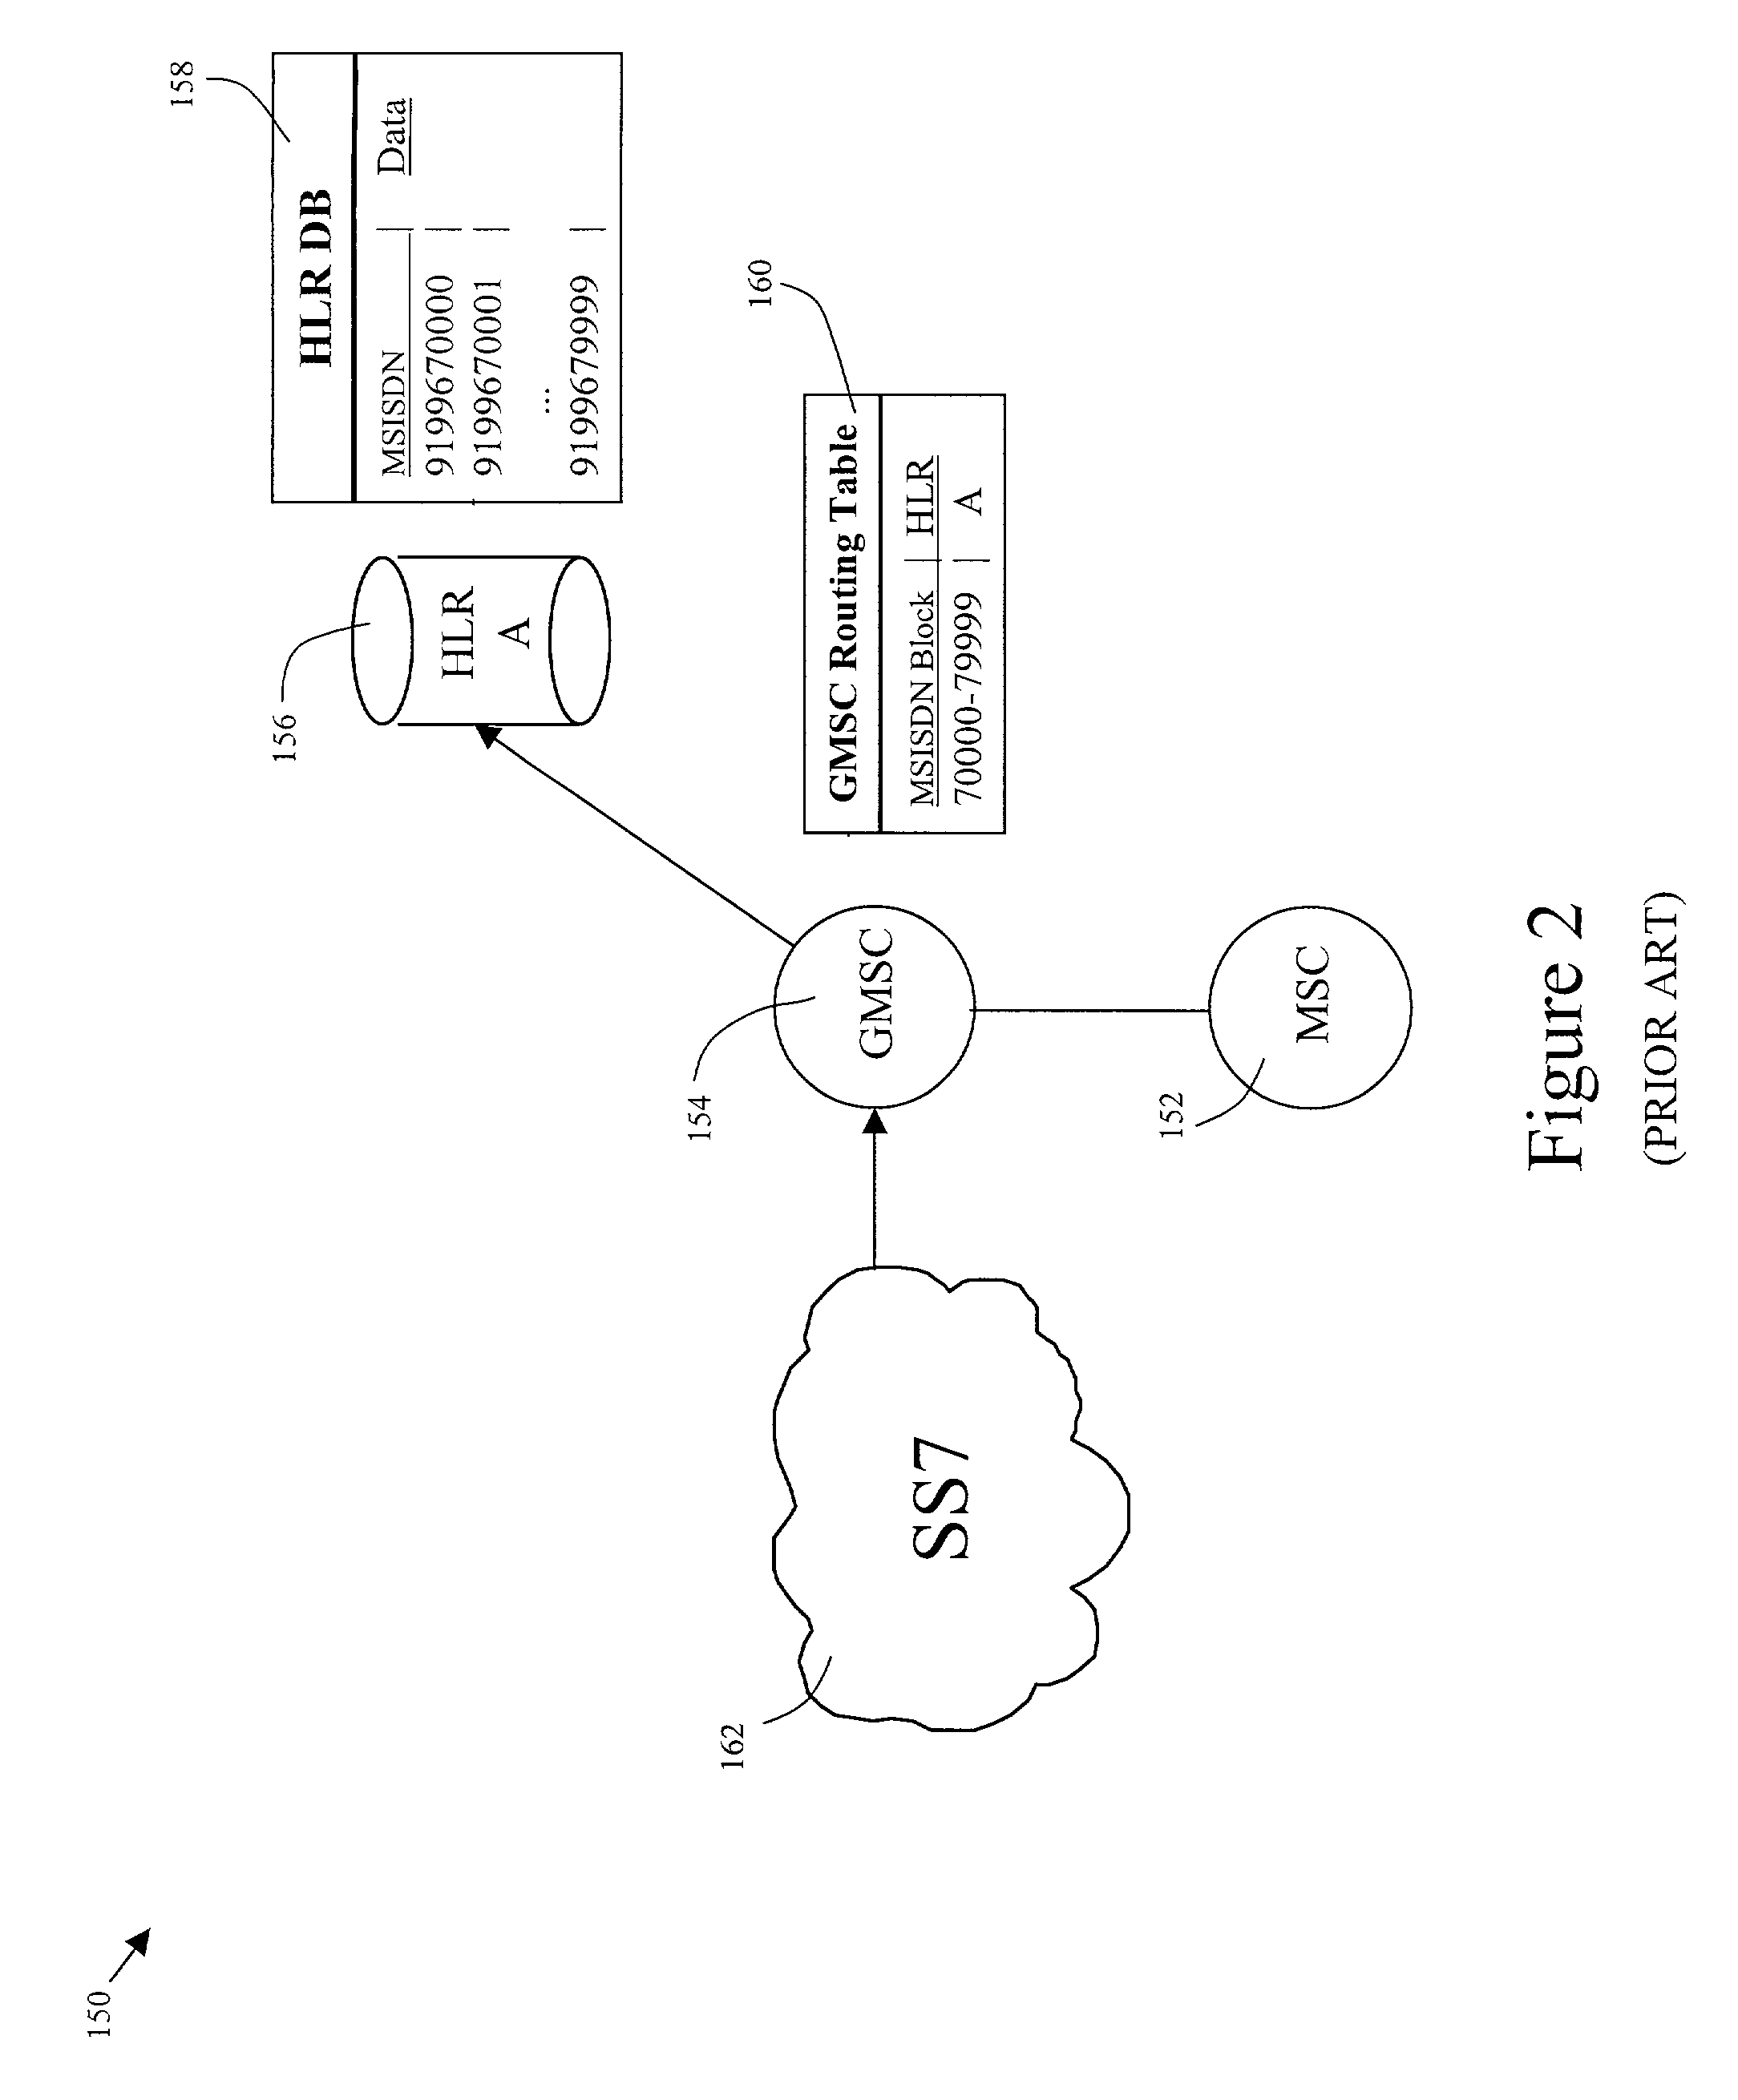 Methods and systems for routing messages in a communications network